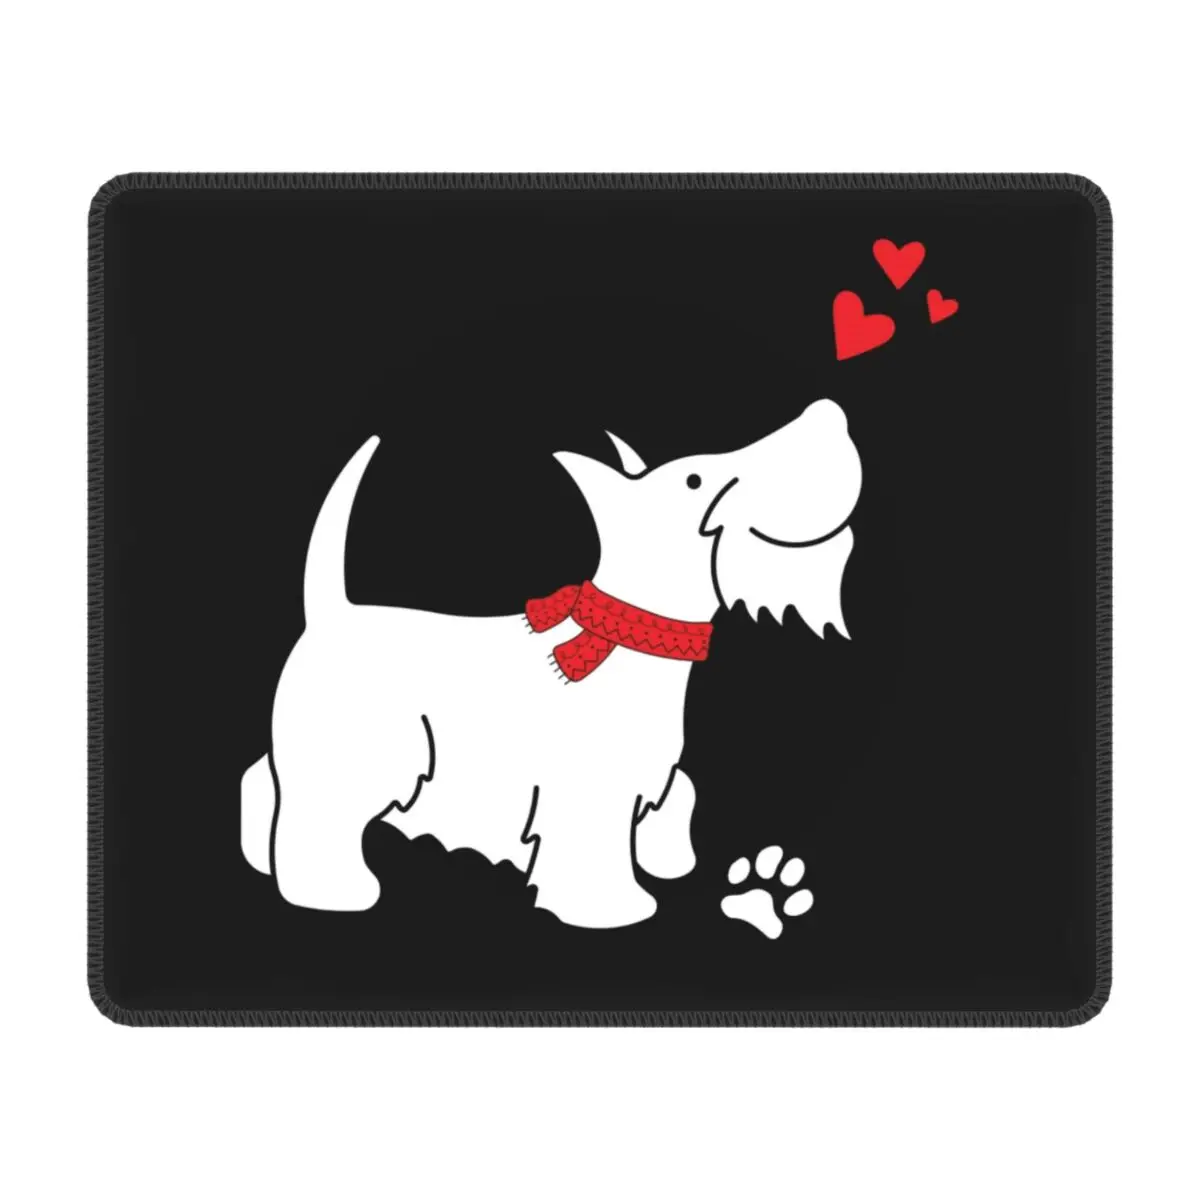 

Scottish Terrier Love Laptop Mouse Pad Waterproof Mousepad with Stitched Edges Anti-Slip Rubber Scottie Dog Mouse Mat for Gaming